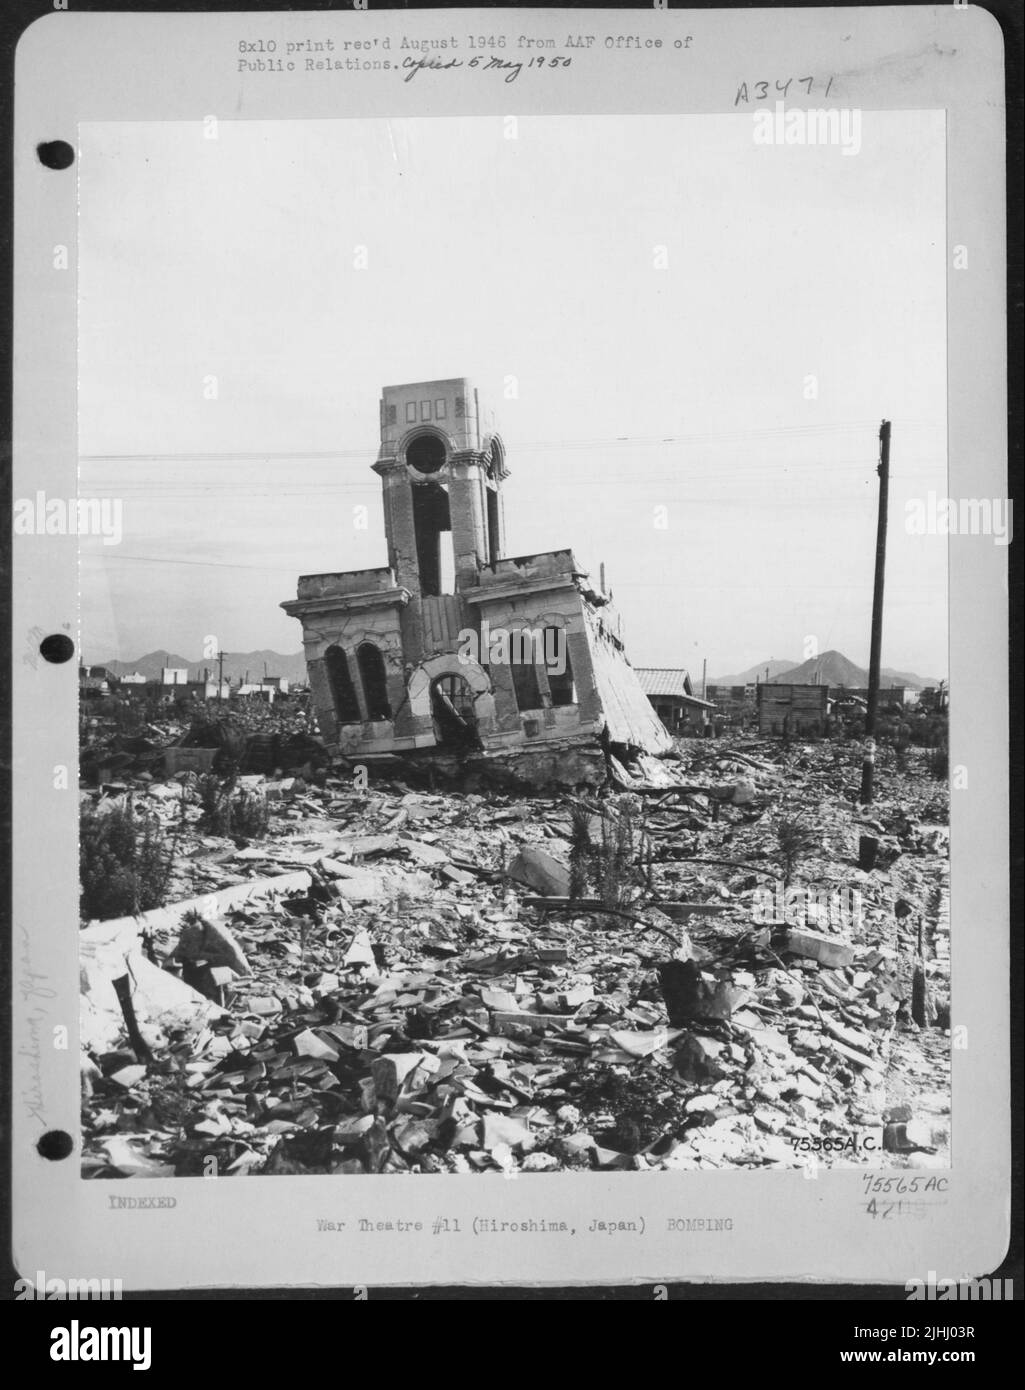 One Year After The Dropping Of The First Atom Bomb, Hiroshima, Japan, Is Still A Town Of Rubble And Debris. This Steel Frame Building Stock Photo